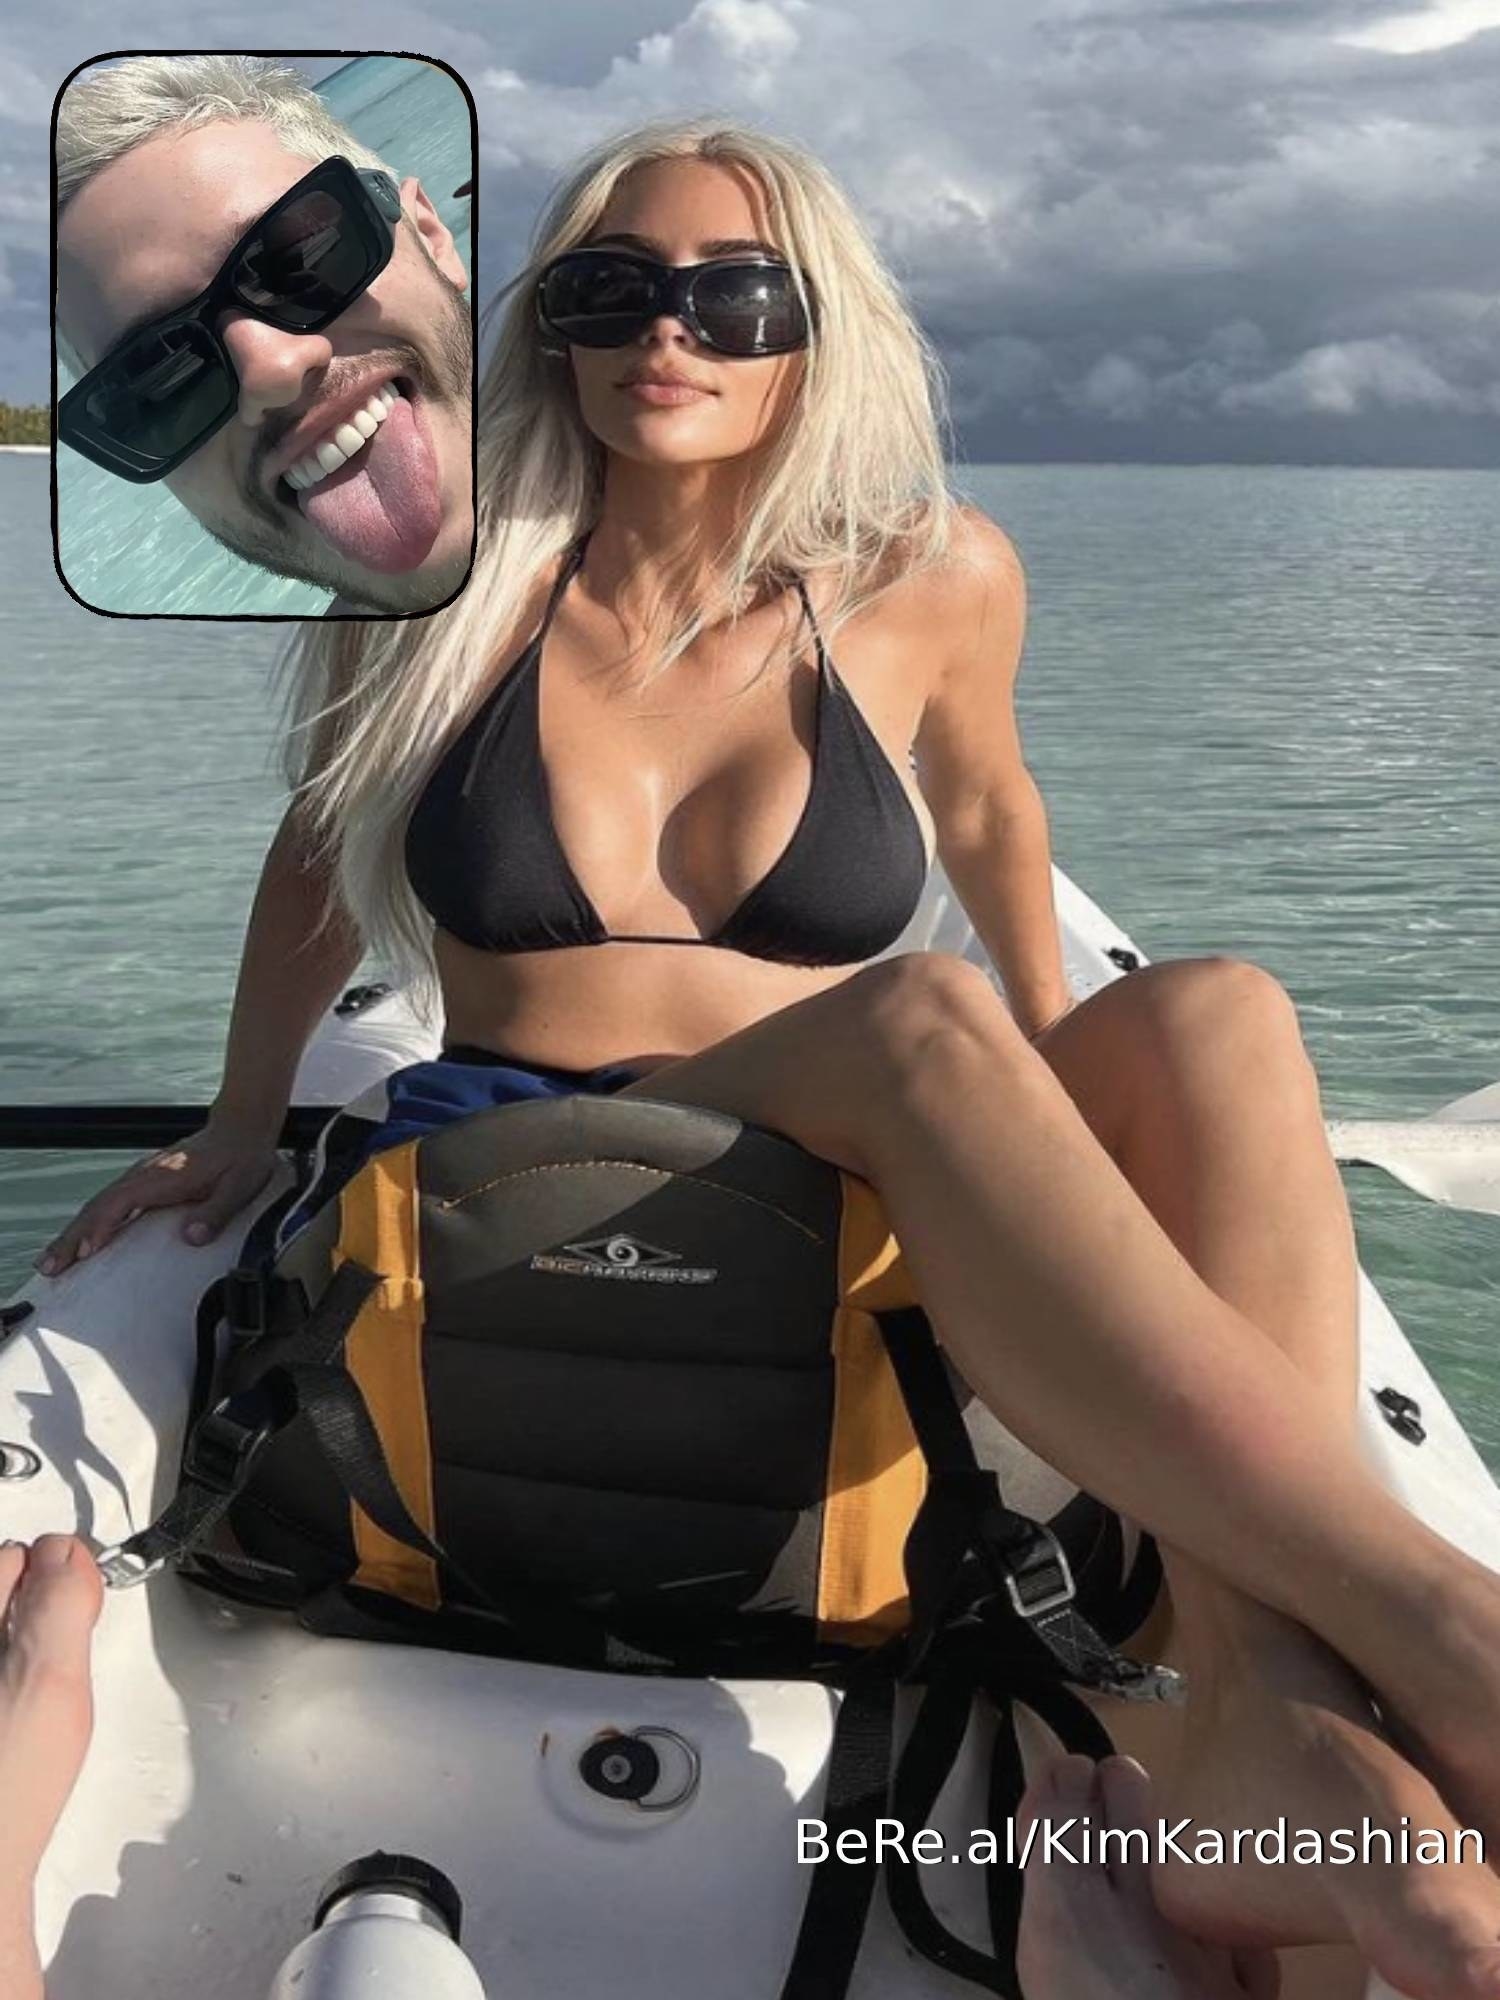 Pete Davidson smiling with his tongue out while Kim Kardashian poses on a boat